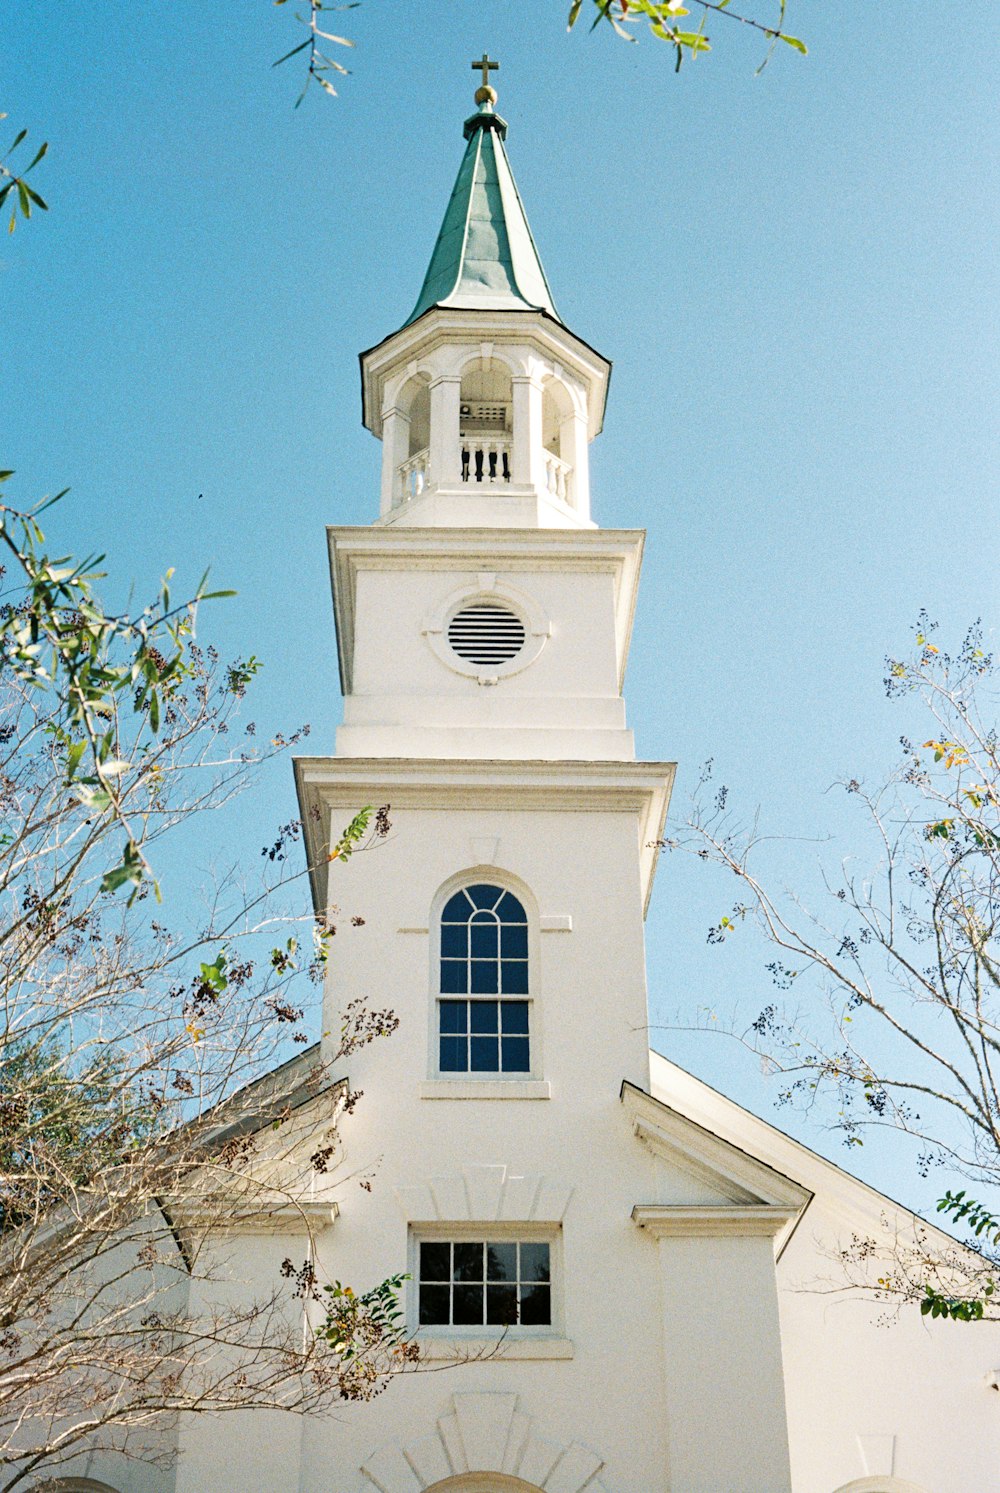 a white church with a steeple and a clock